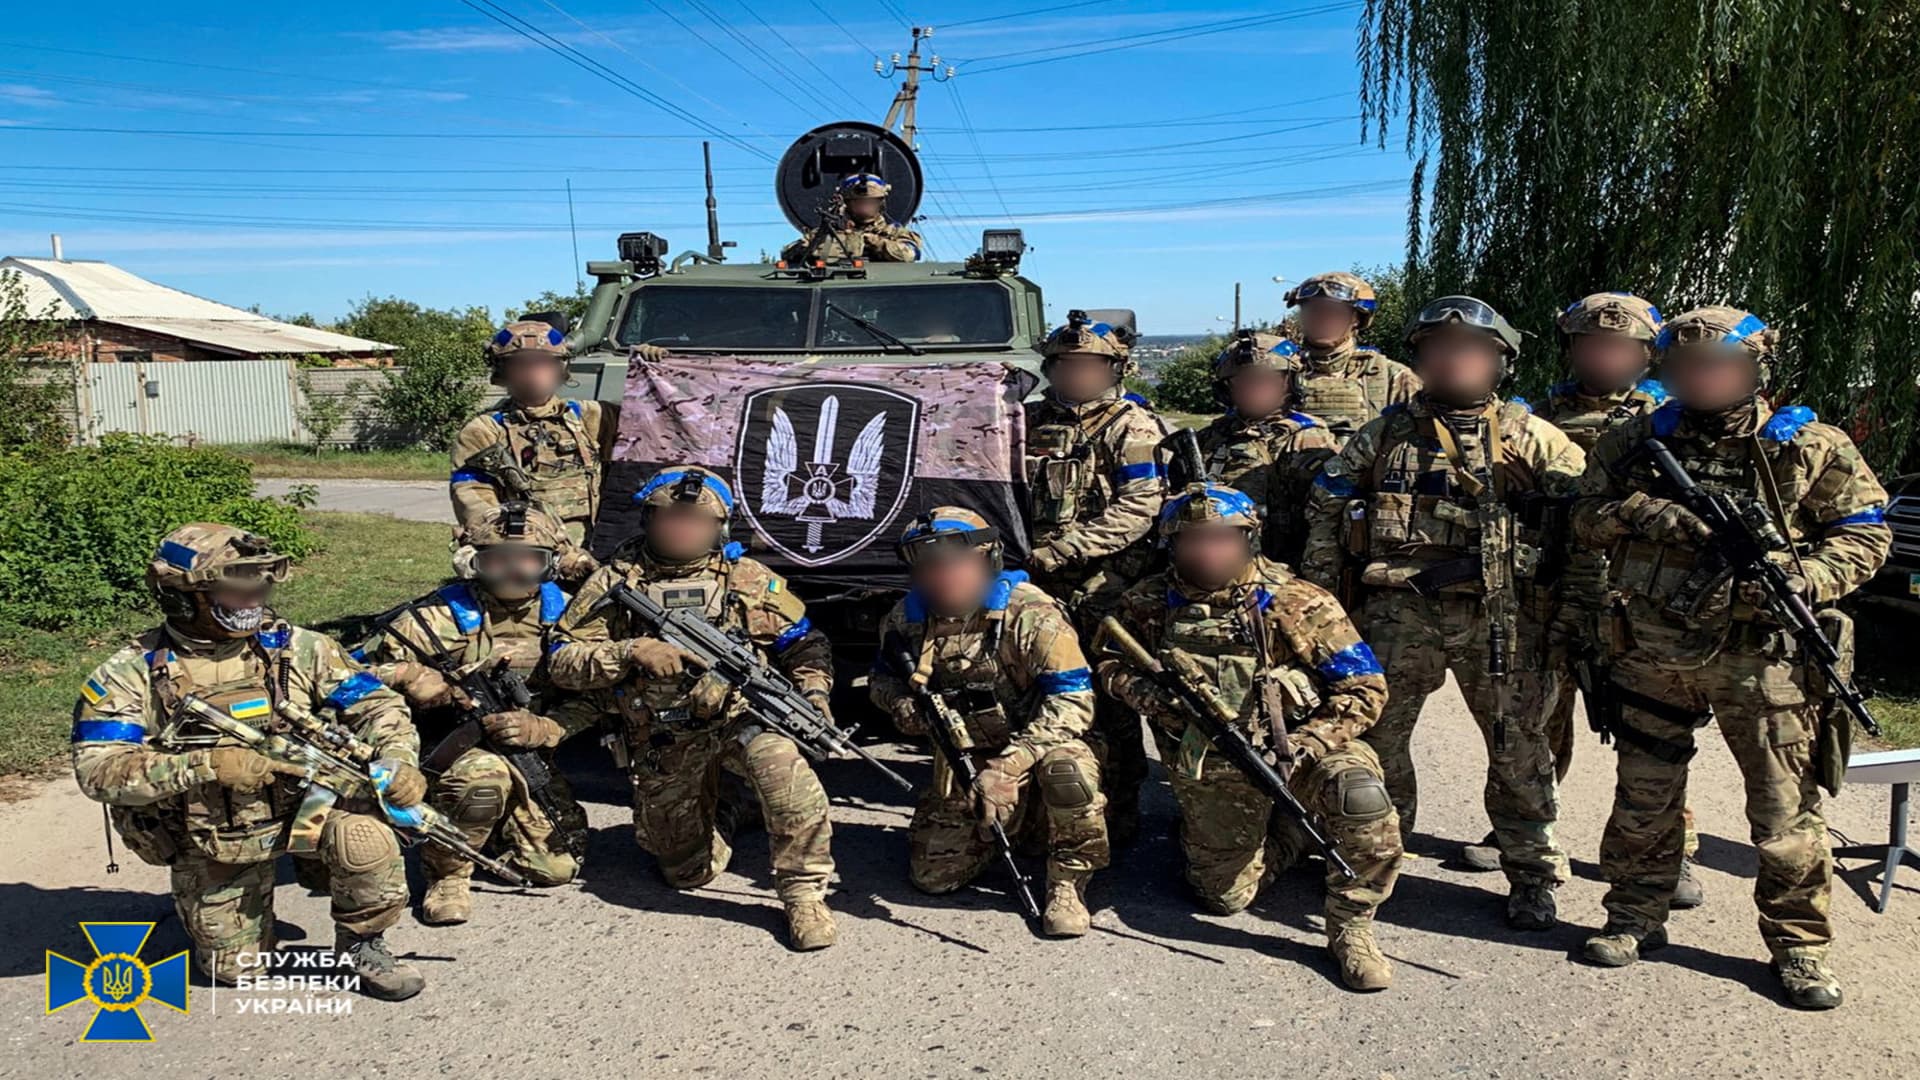 Service members of the State Security Service of Ukraine pose for a picture in the recently liberated town of Kupiansk in the Kharkiv region of Ukraine in this handout picture released Sept. 10, 2022.